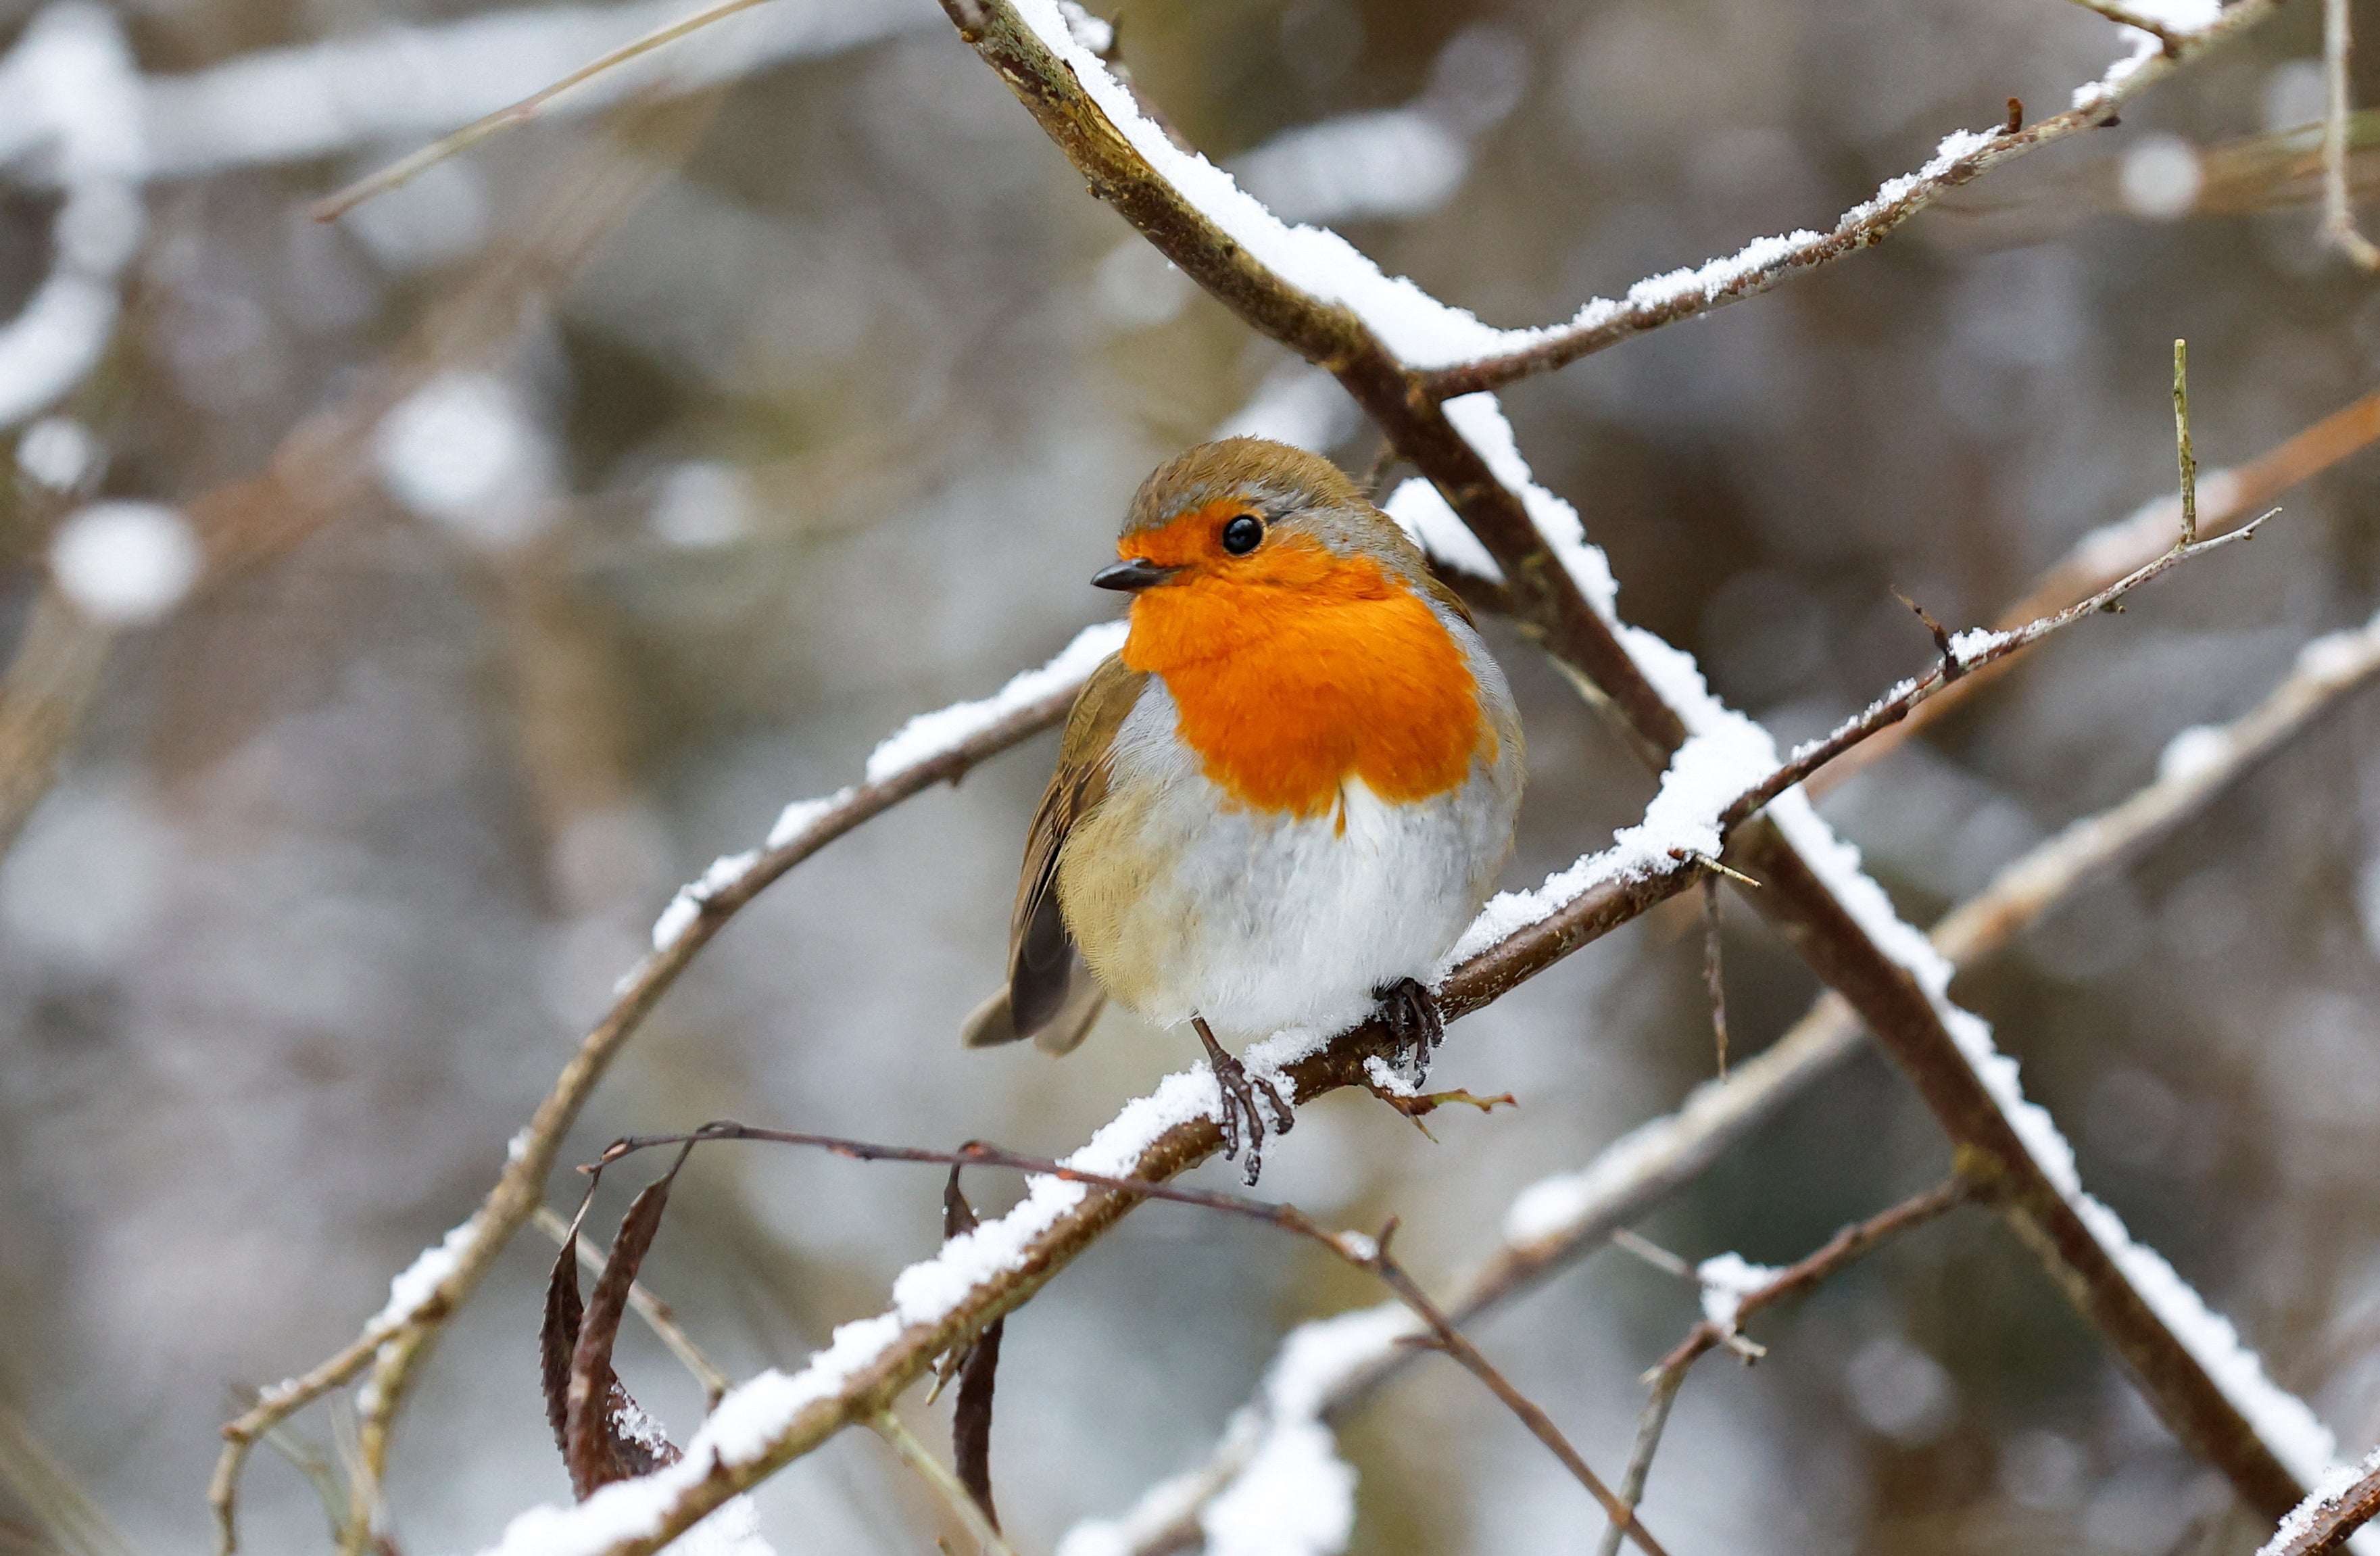 A robin sits on a snowy branch during cold weather in Northampton